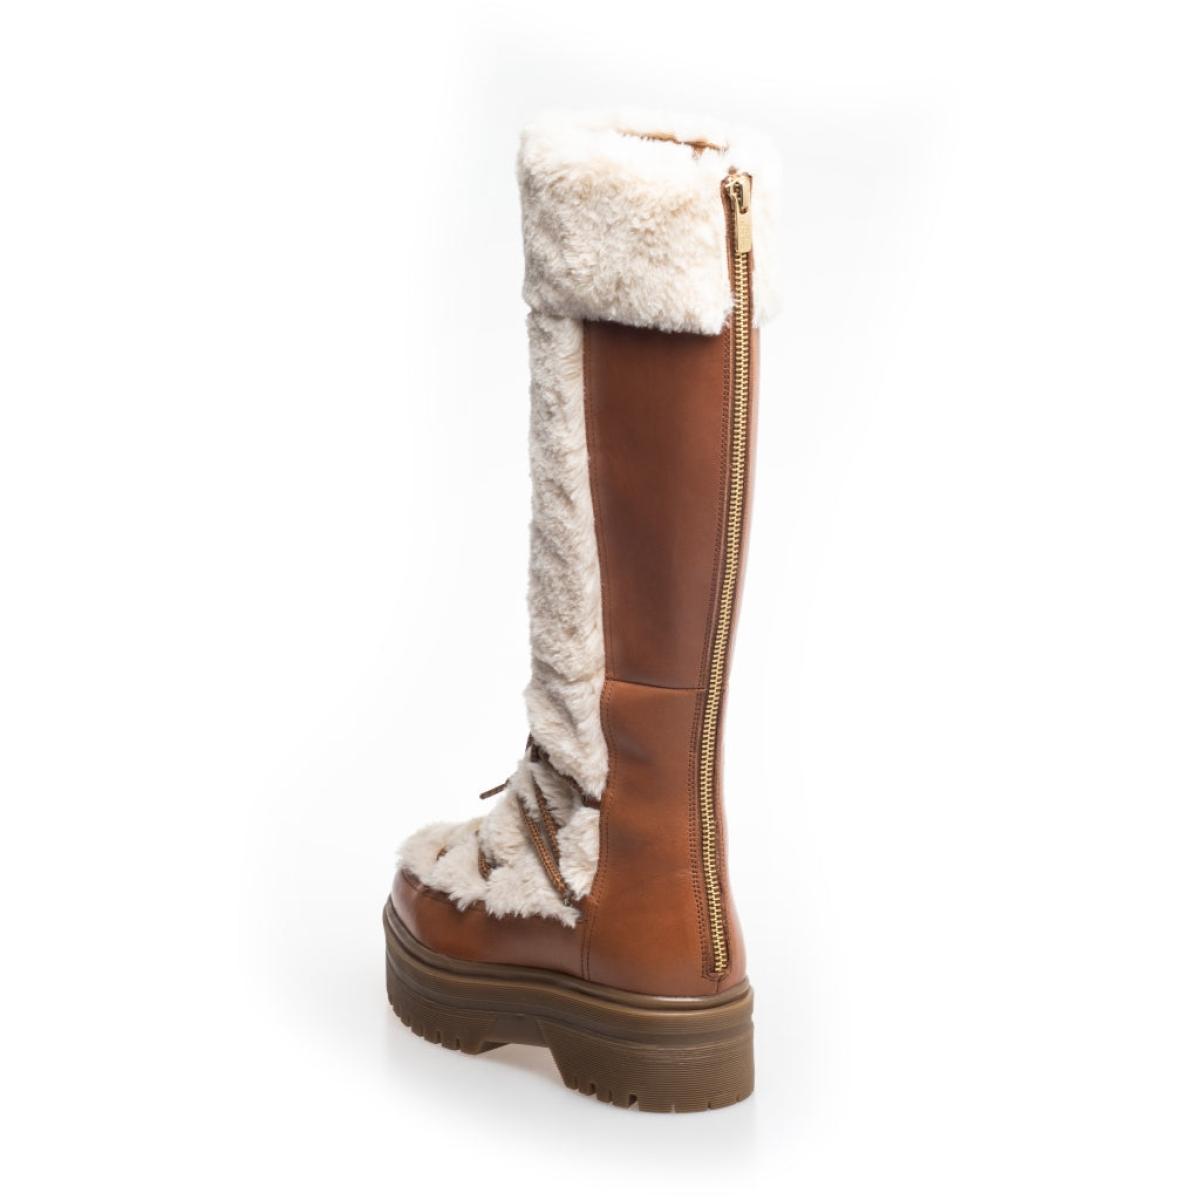 Leather Boots Snow By Snow 22 High - Cognac Off-White Limited Time Offer Copenhagen Shoes Women - 1